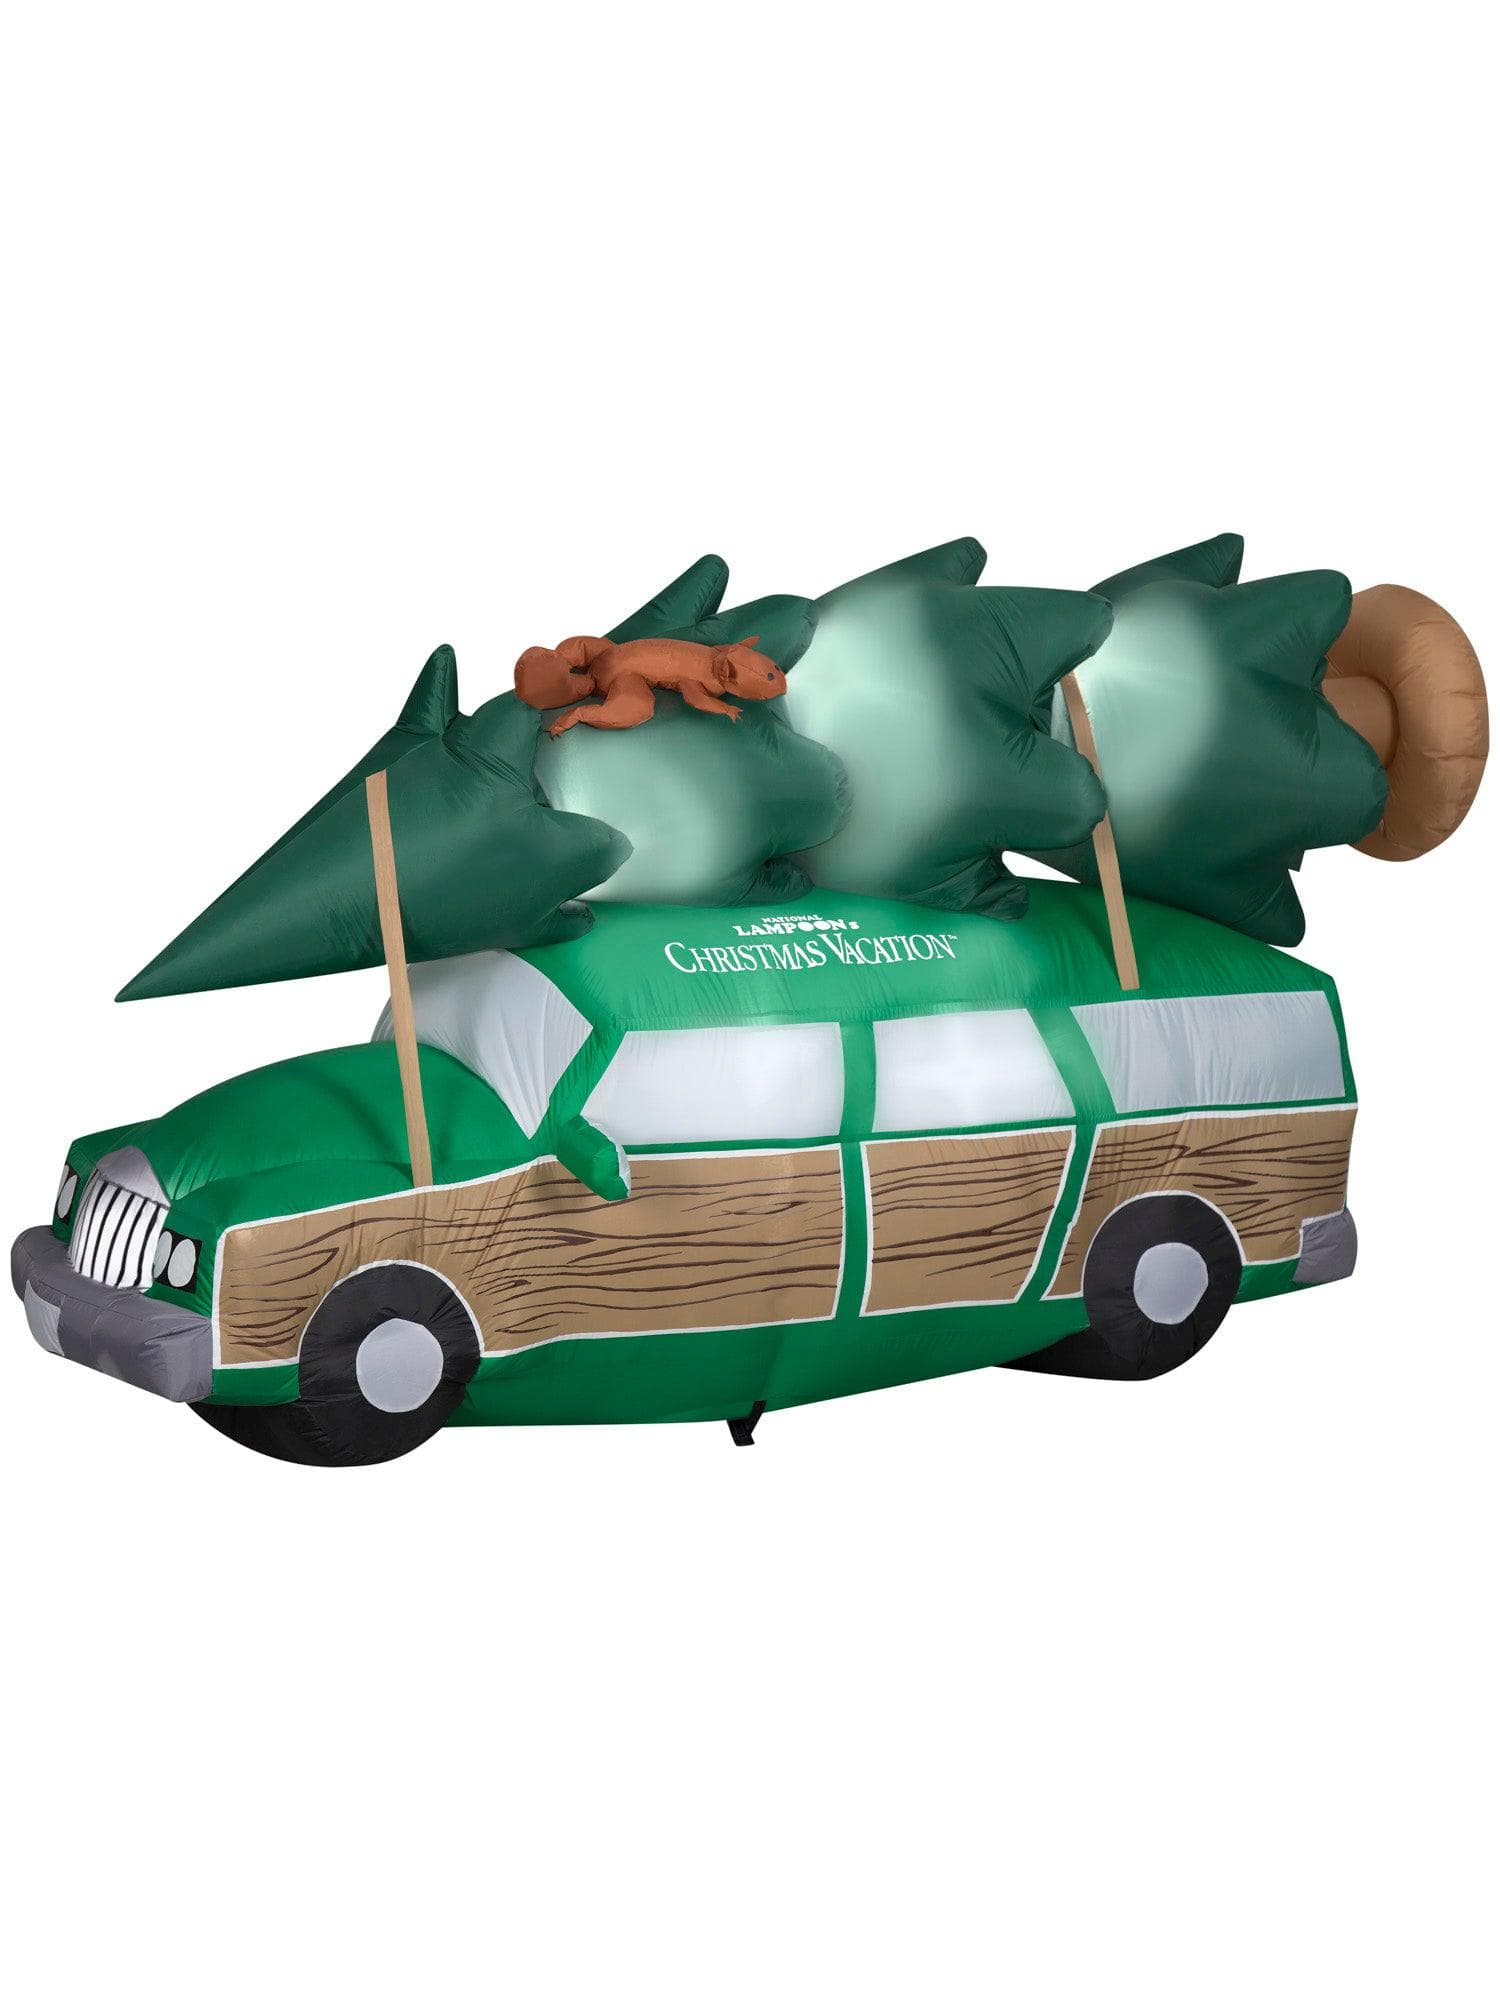 8 Foot National Lampoons Christmas Vacation Station Wagon Light Up Inflatable Lawn Decor - costumes.com